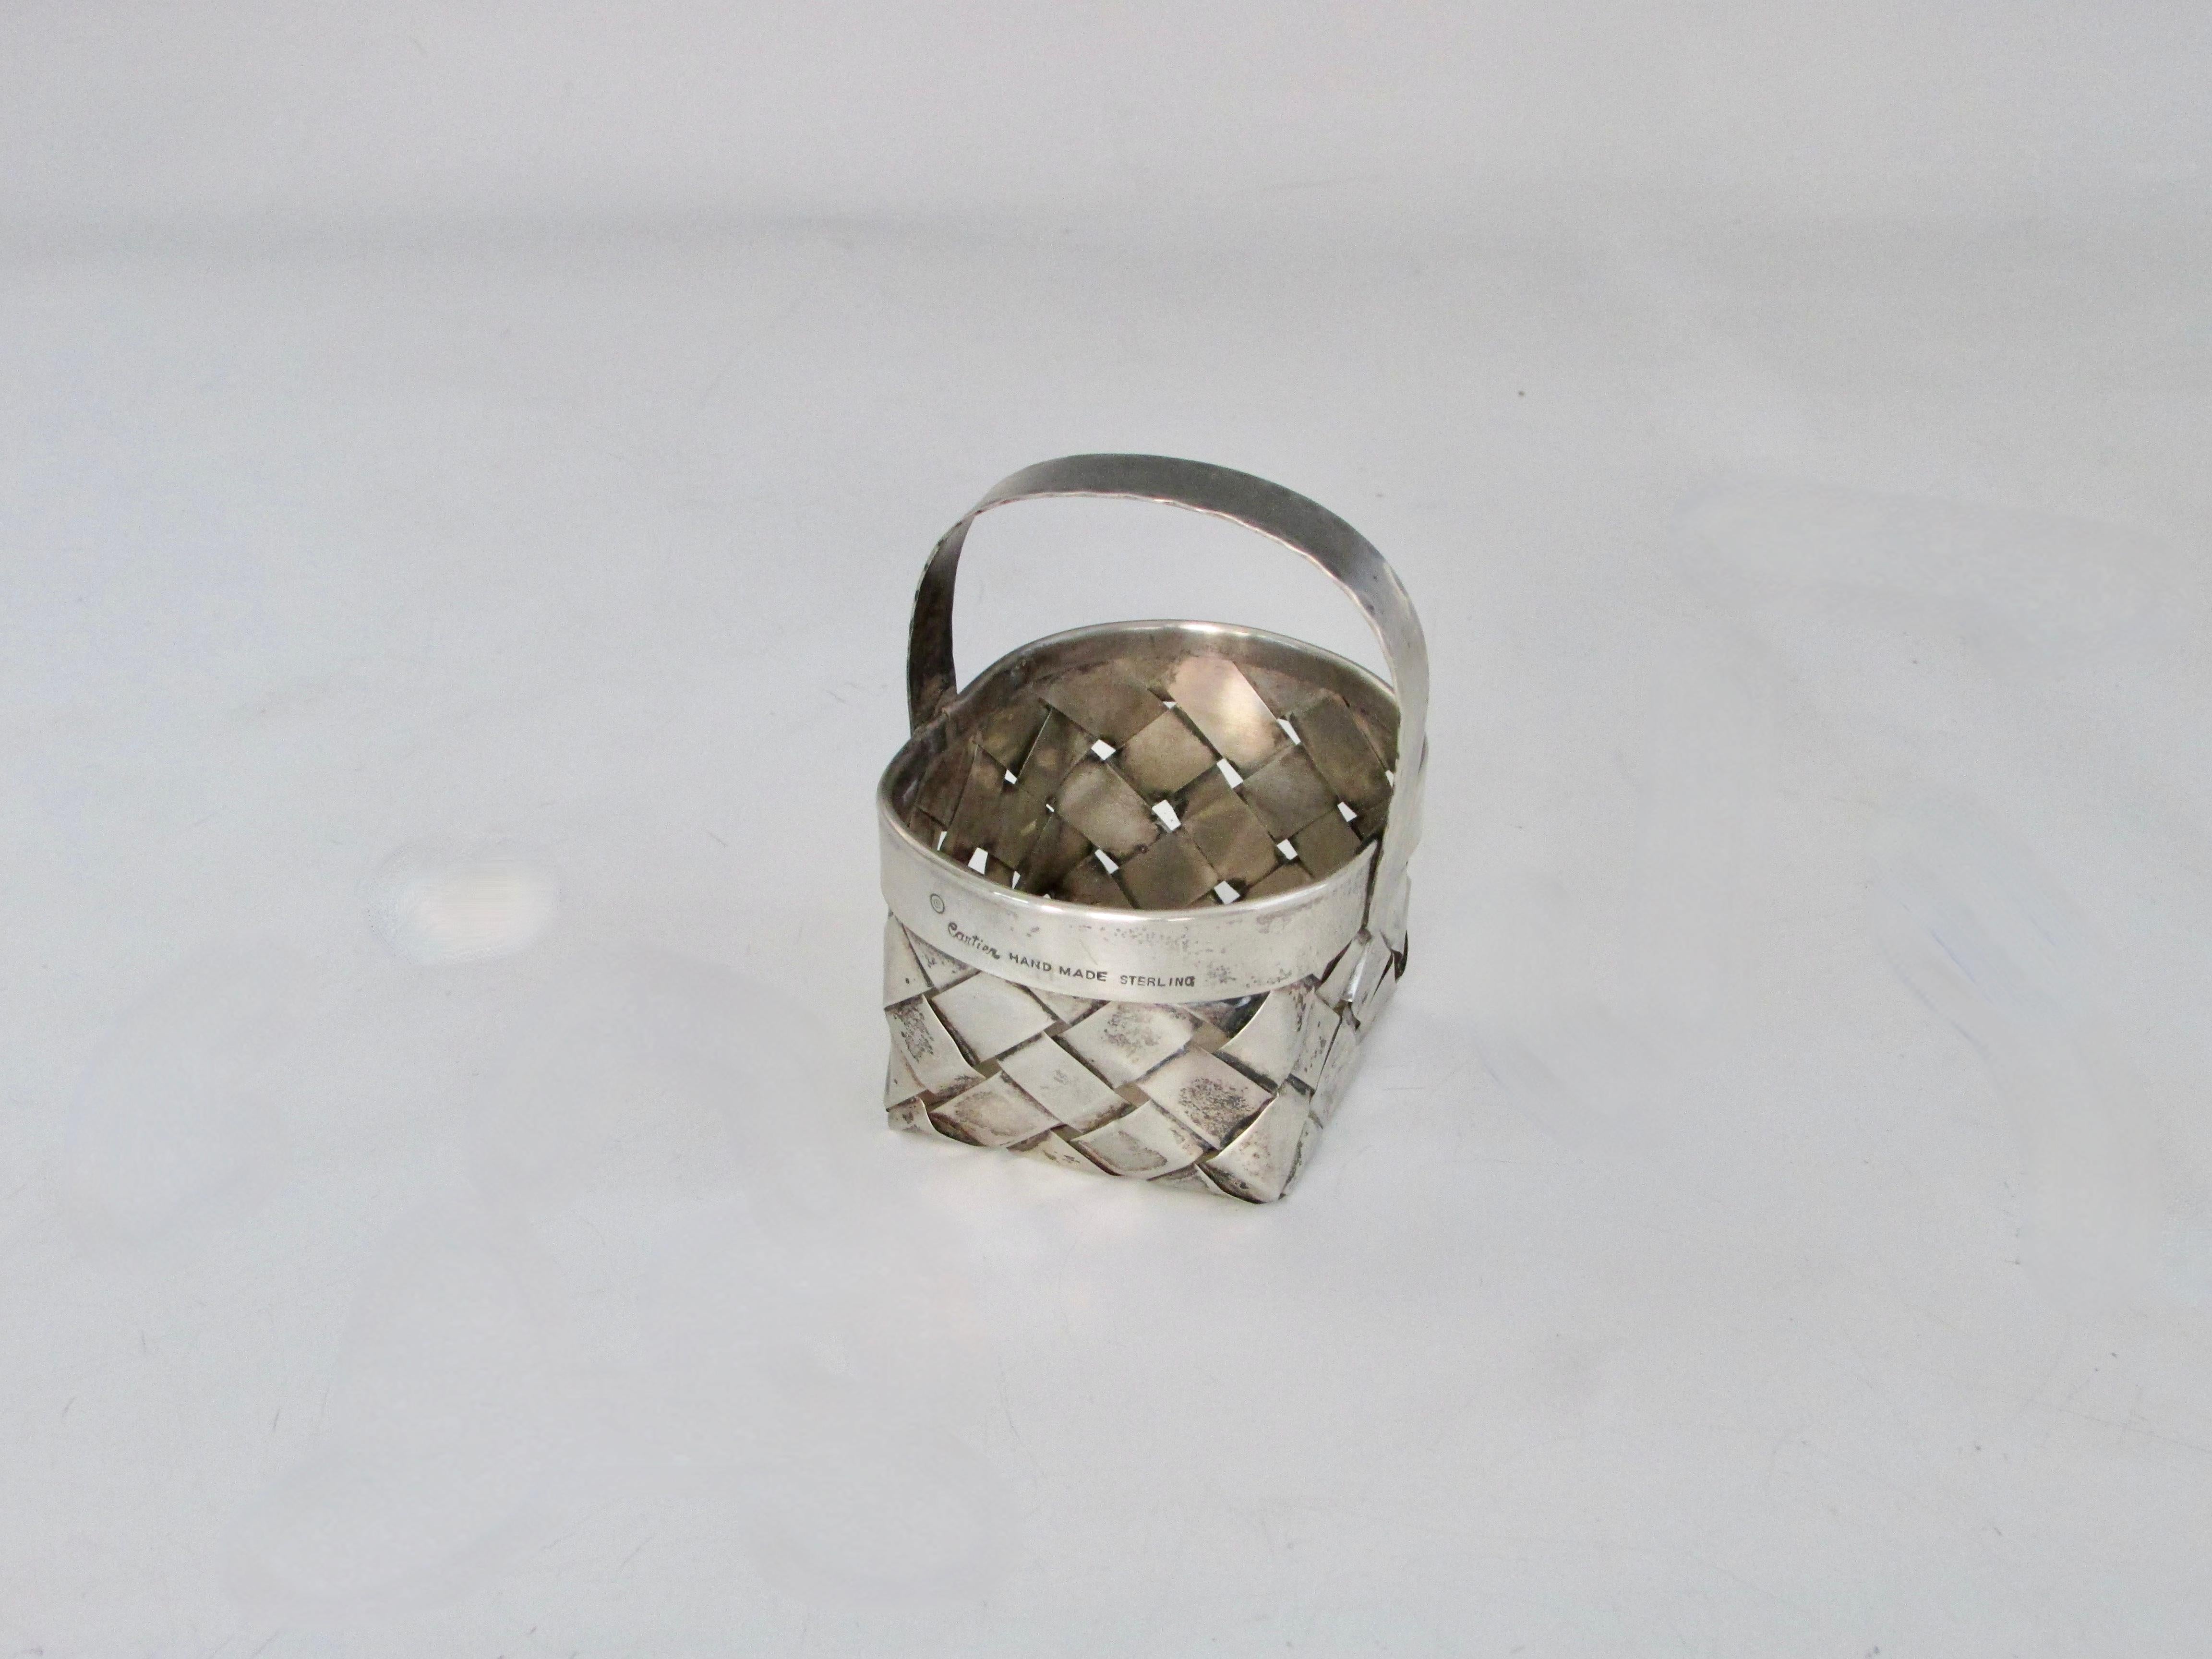 Hand-Crafted Hand Made Cartier Woven Sterling Silver Basket